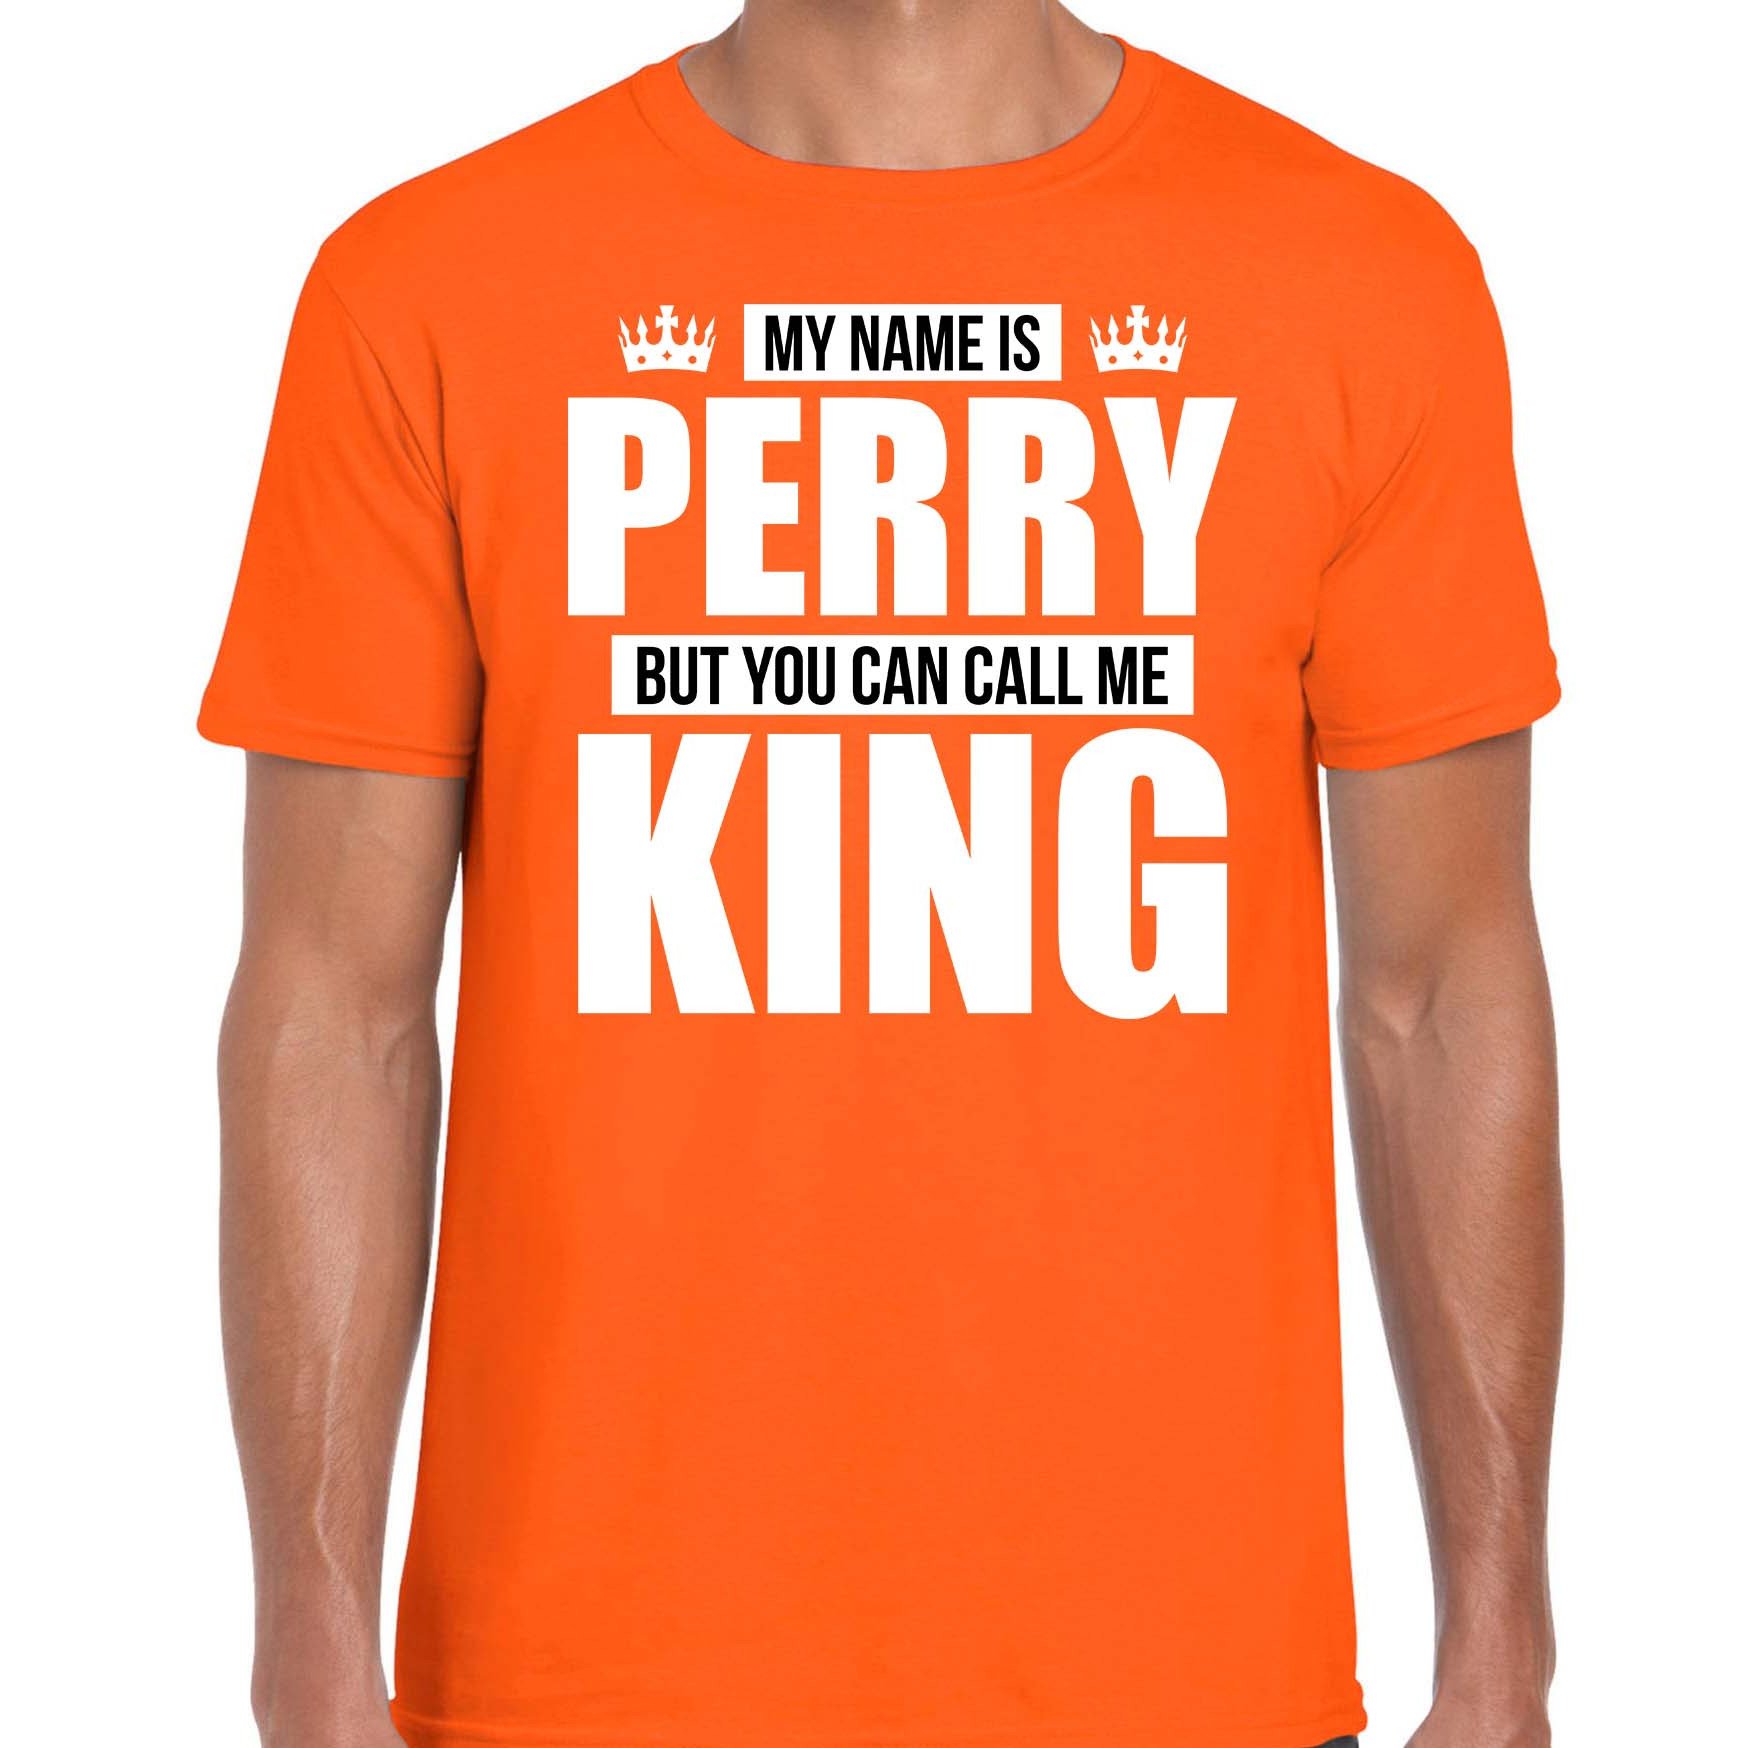 Naam My name is Perry but you can call me King shirt oranje cadeau shirt